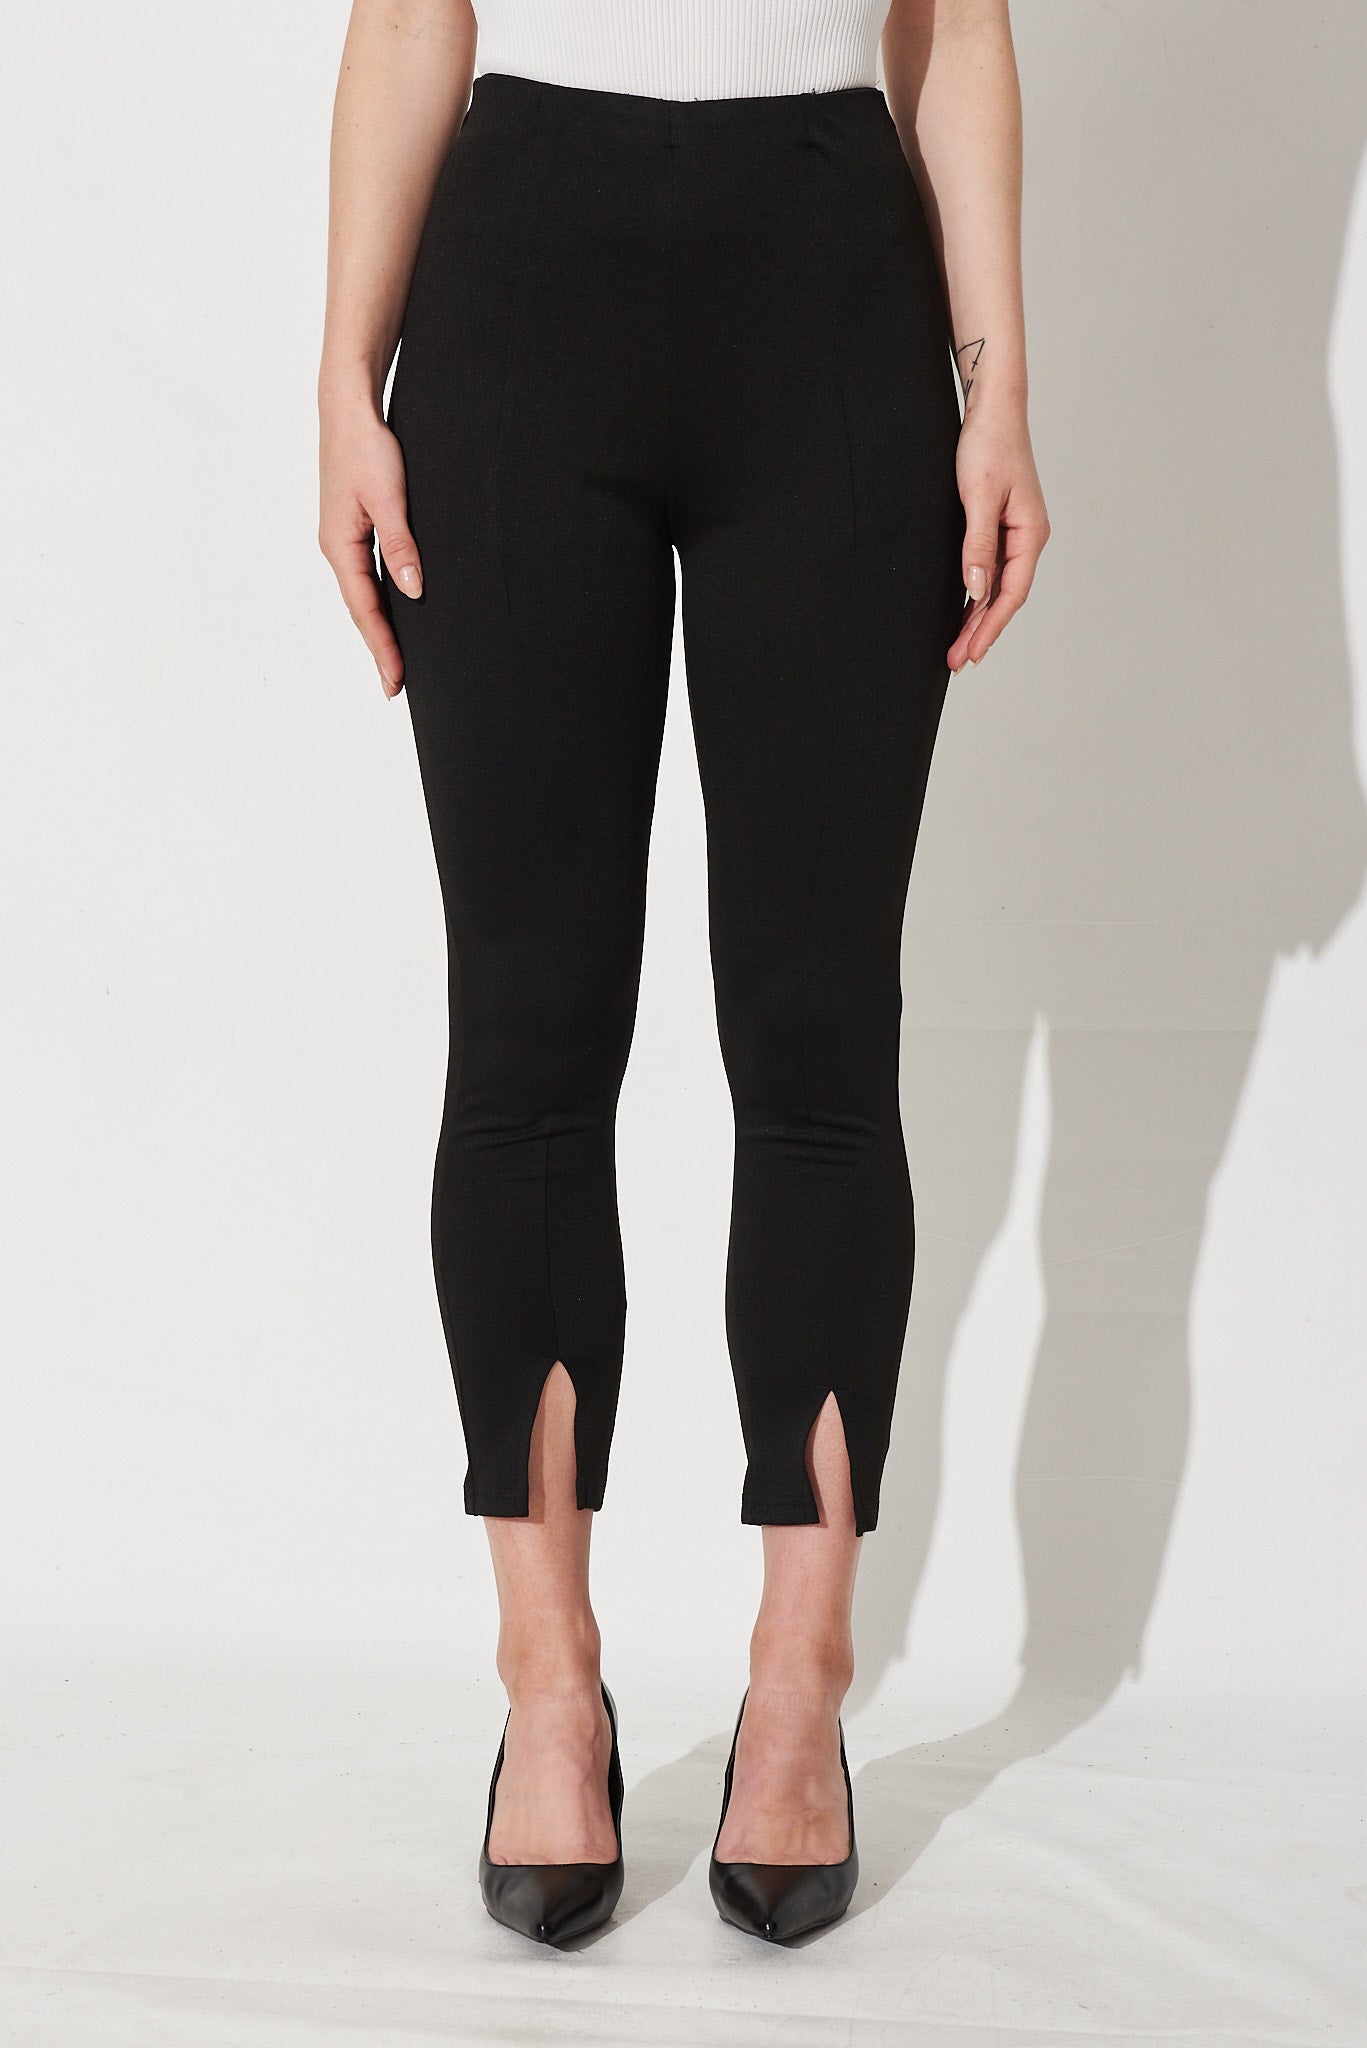 Sammy Stretch Pant In Black - Front